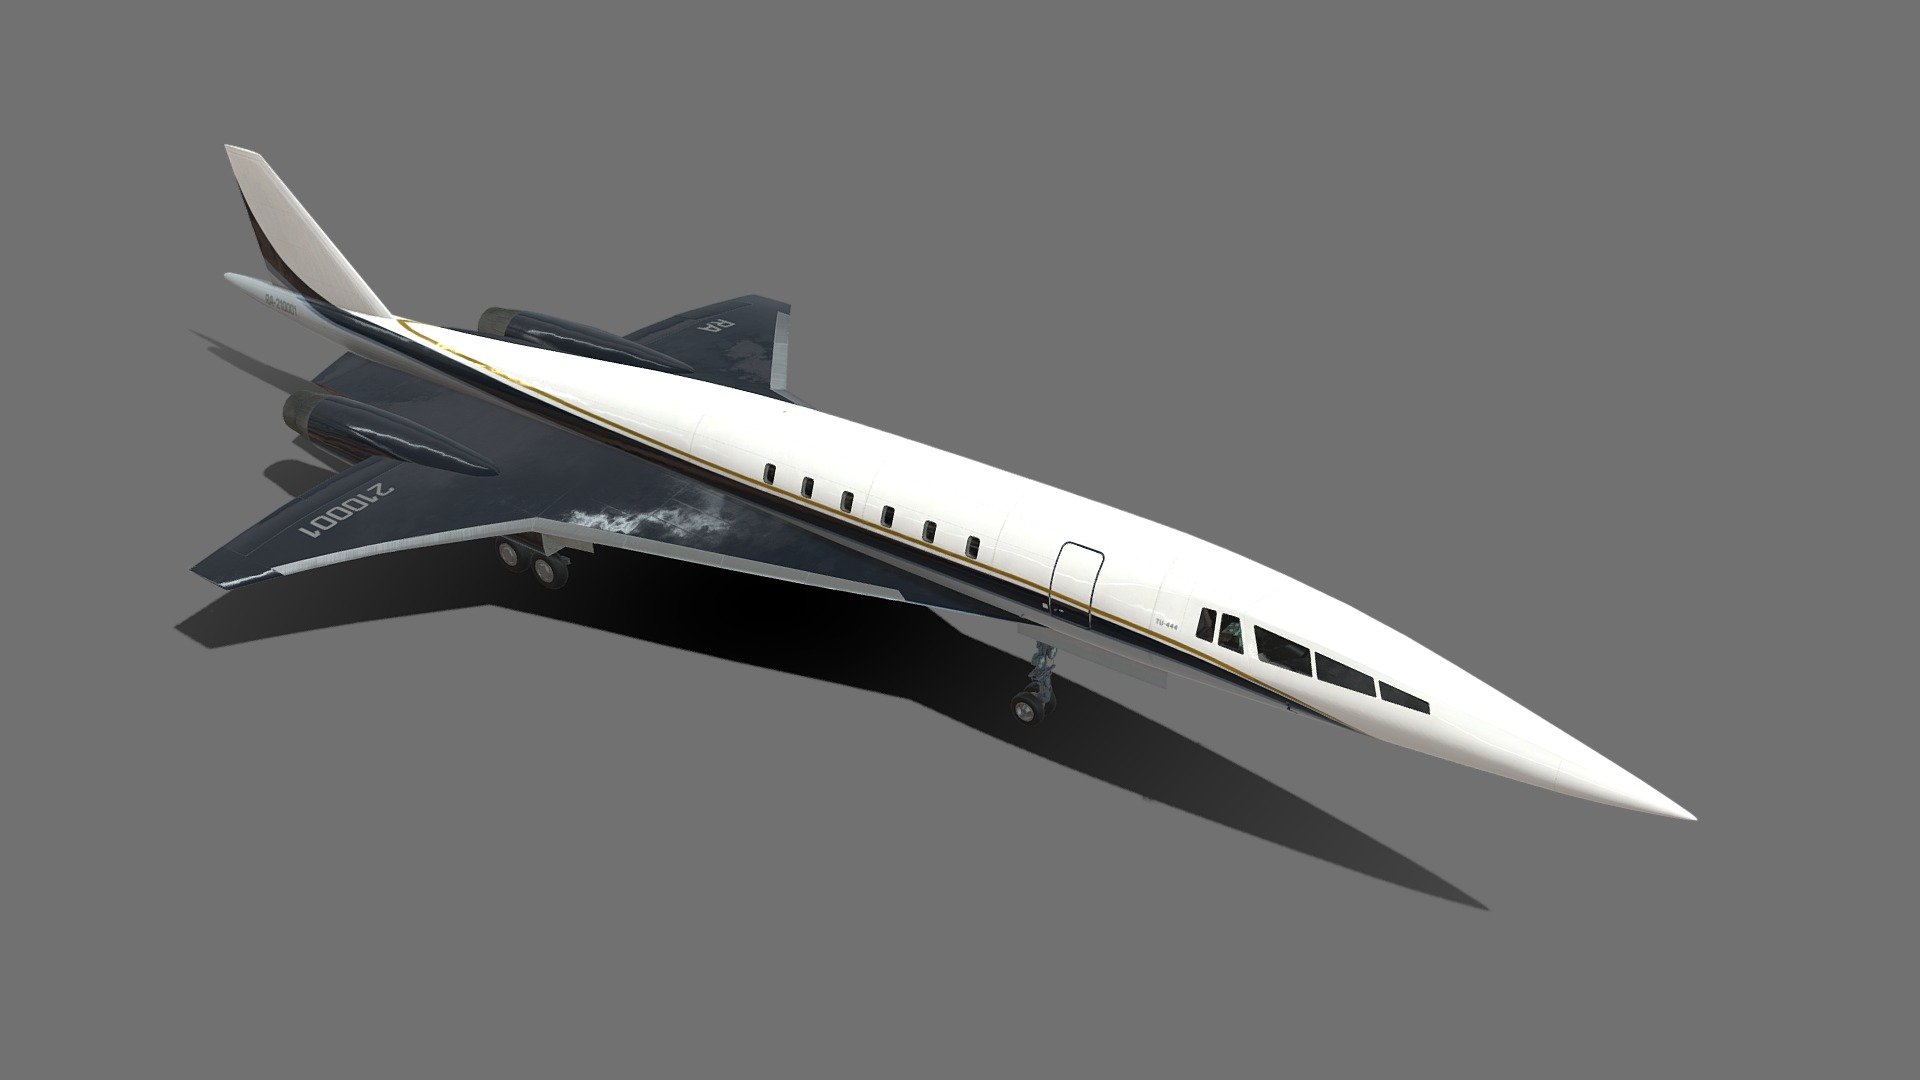 The Tu-444 is a concept Supersonic Business Jet from Tupolev. It will be the fastest business jet on the market, capable of carrying 10 people at Mach 2 over 4500 miles 3d model